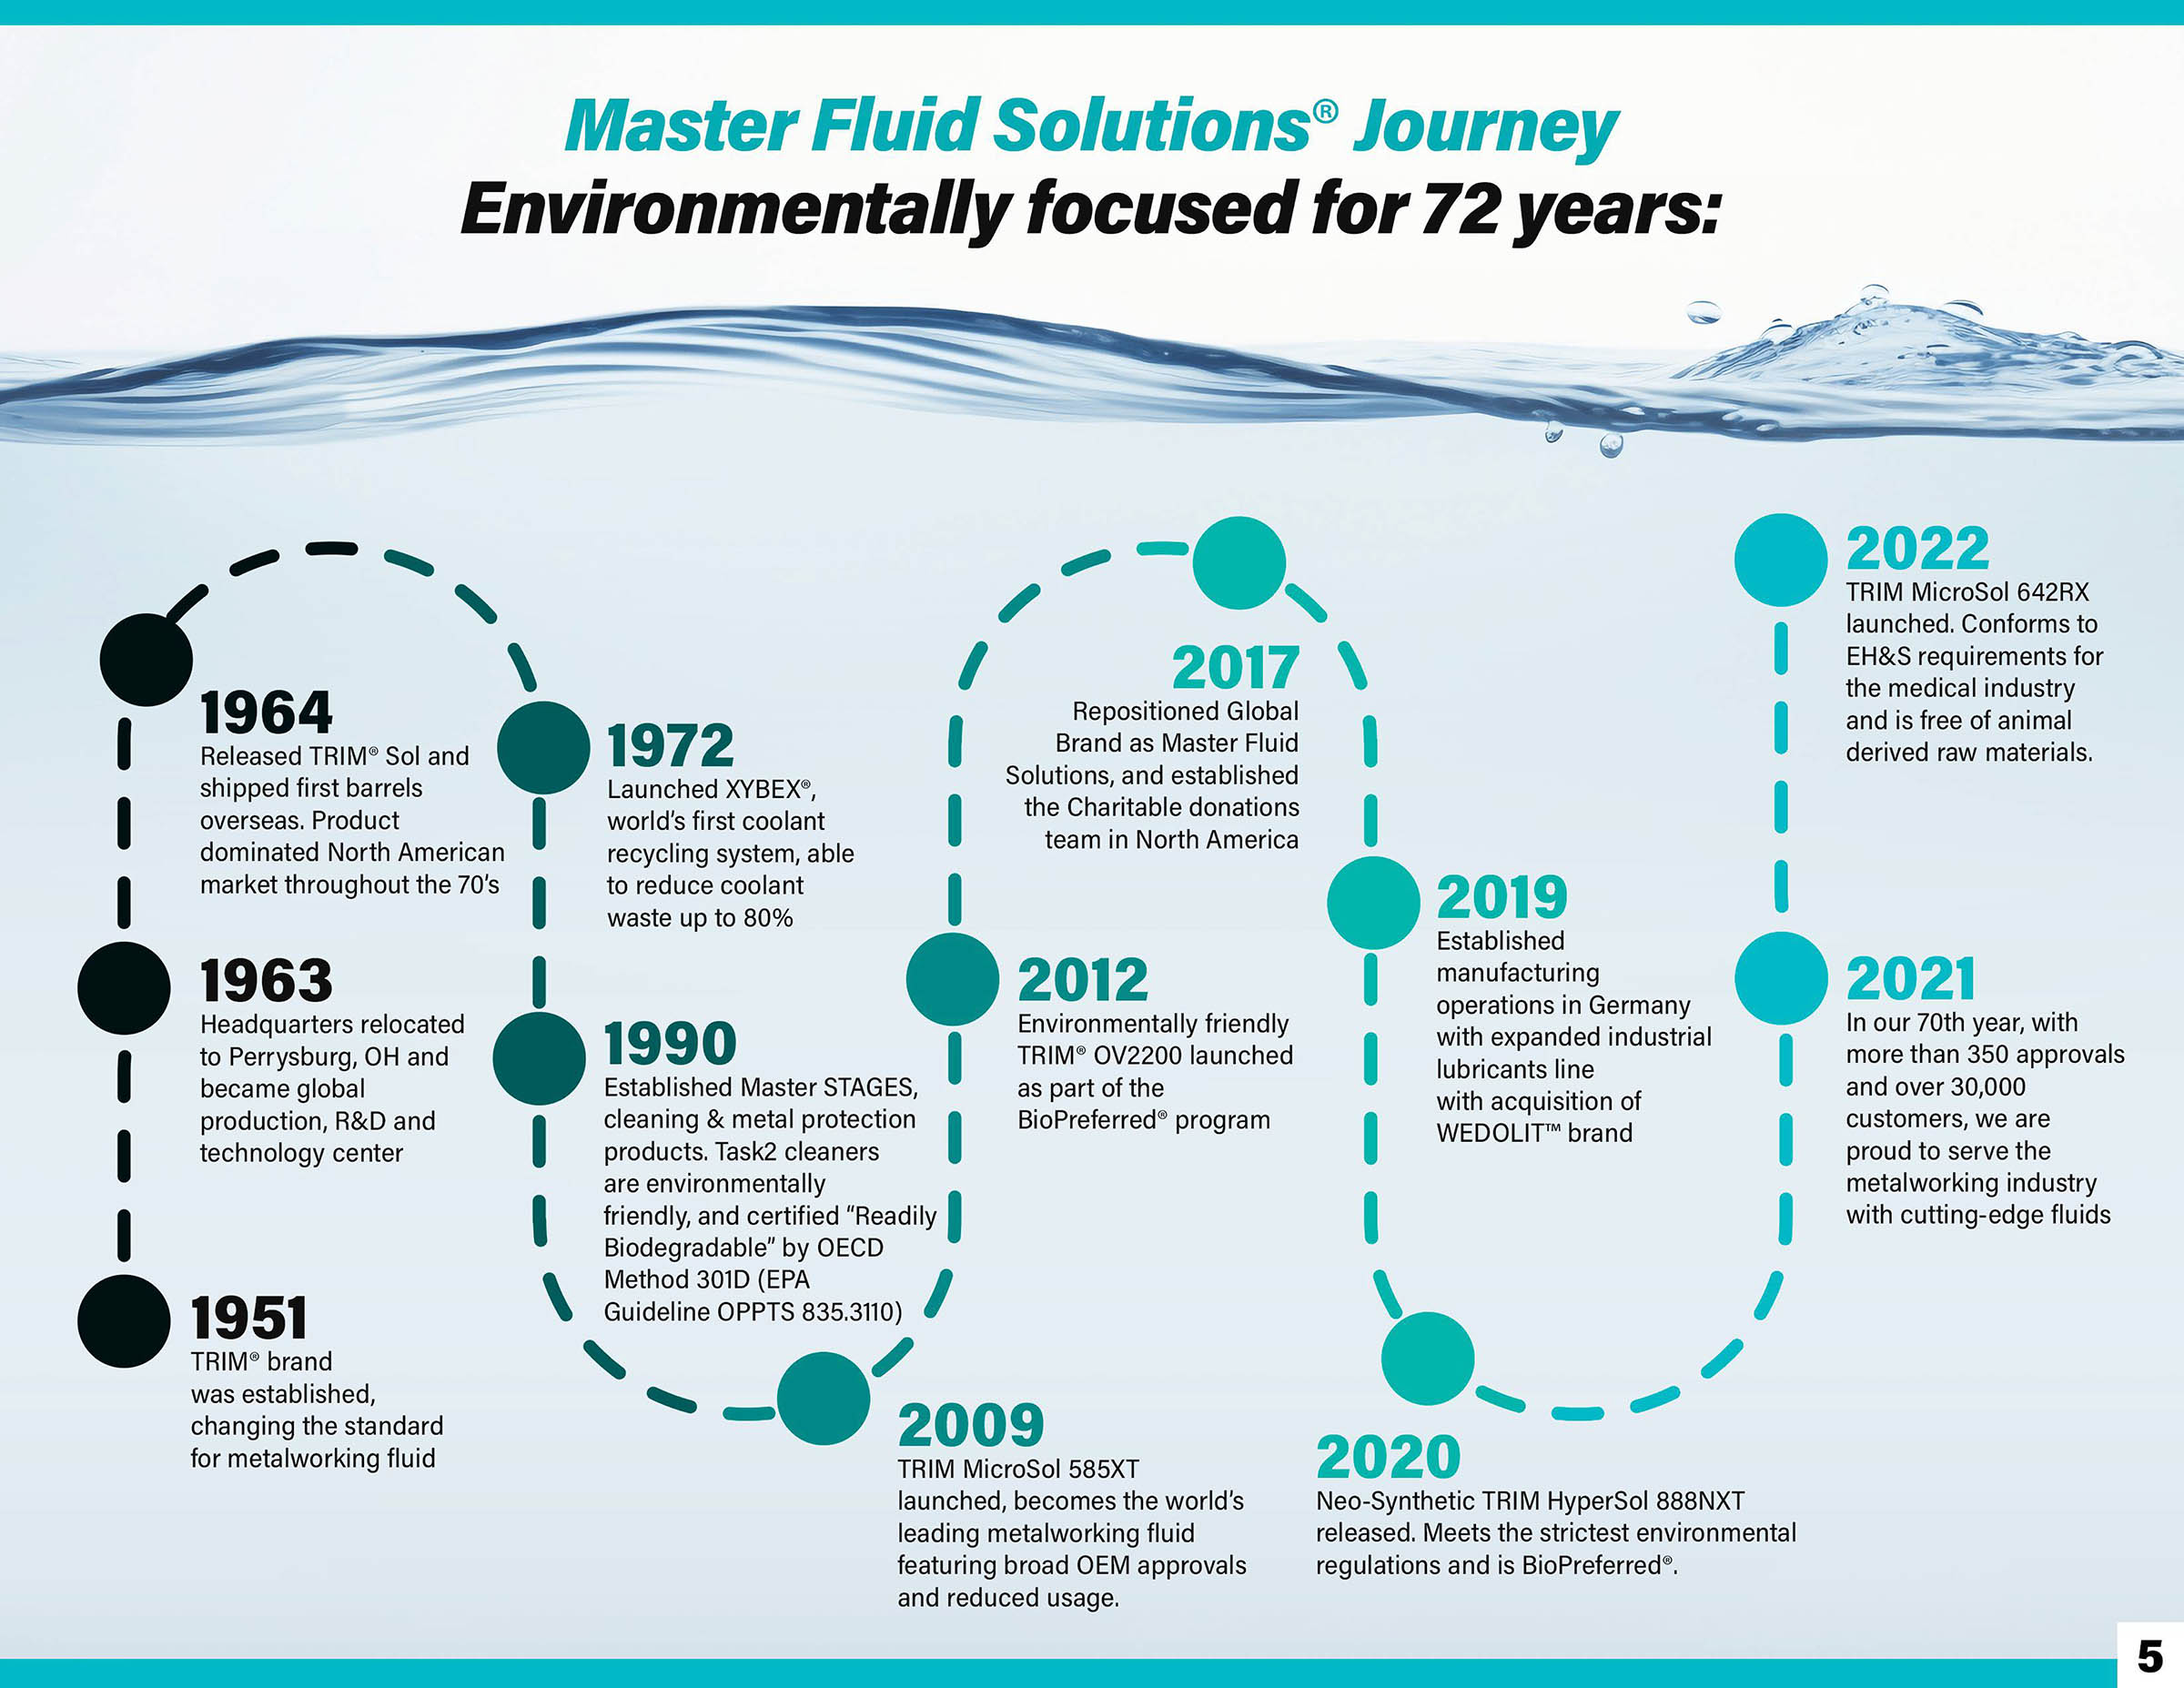 Sustainability Report - Master Fluid Solutions Journey. Environmentally focused for 72 years